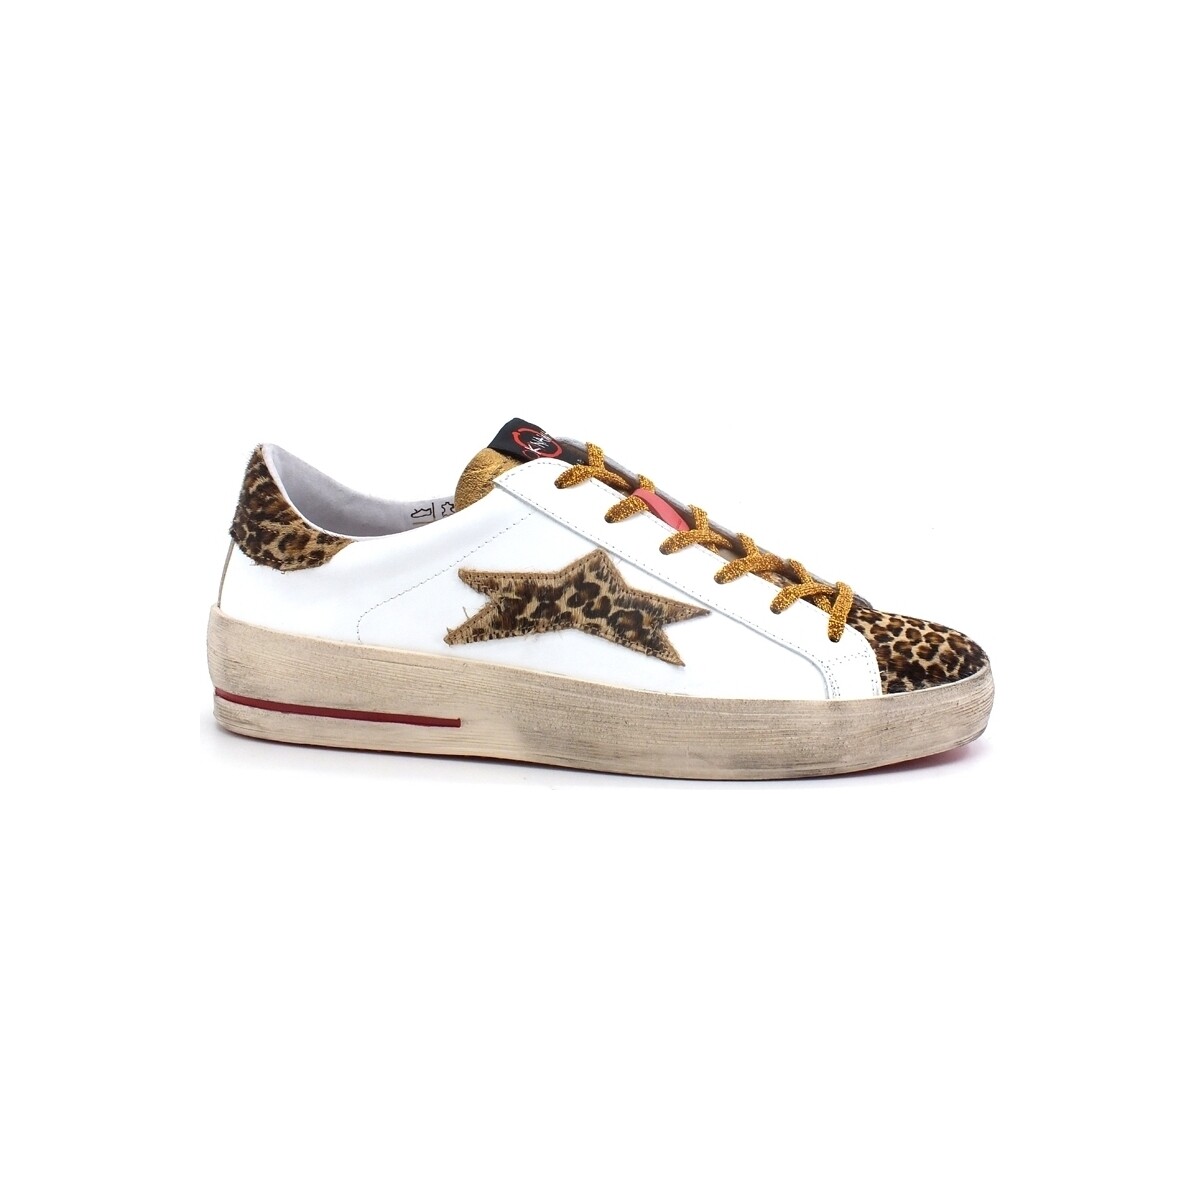 Chaussures Femme Bottes Okinawa Low Plus Limited Sneaker Cavallino Bianco Leopard 1927 Blanc